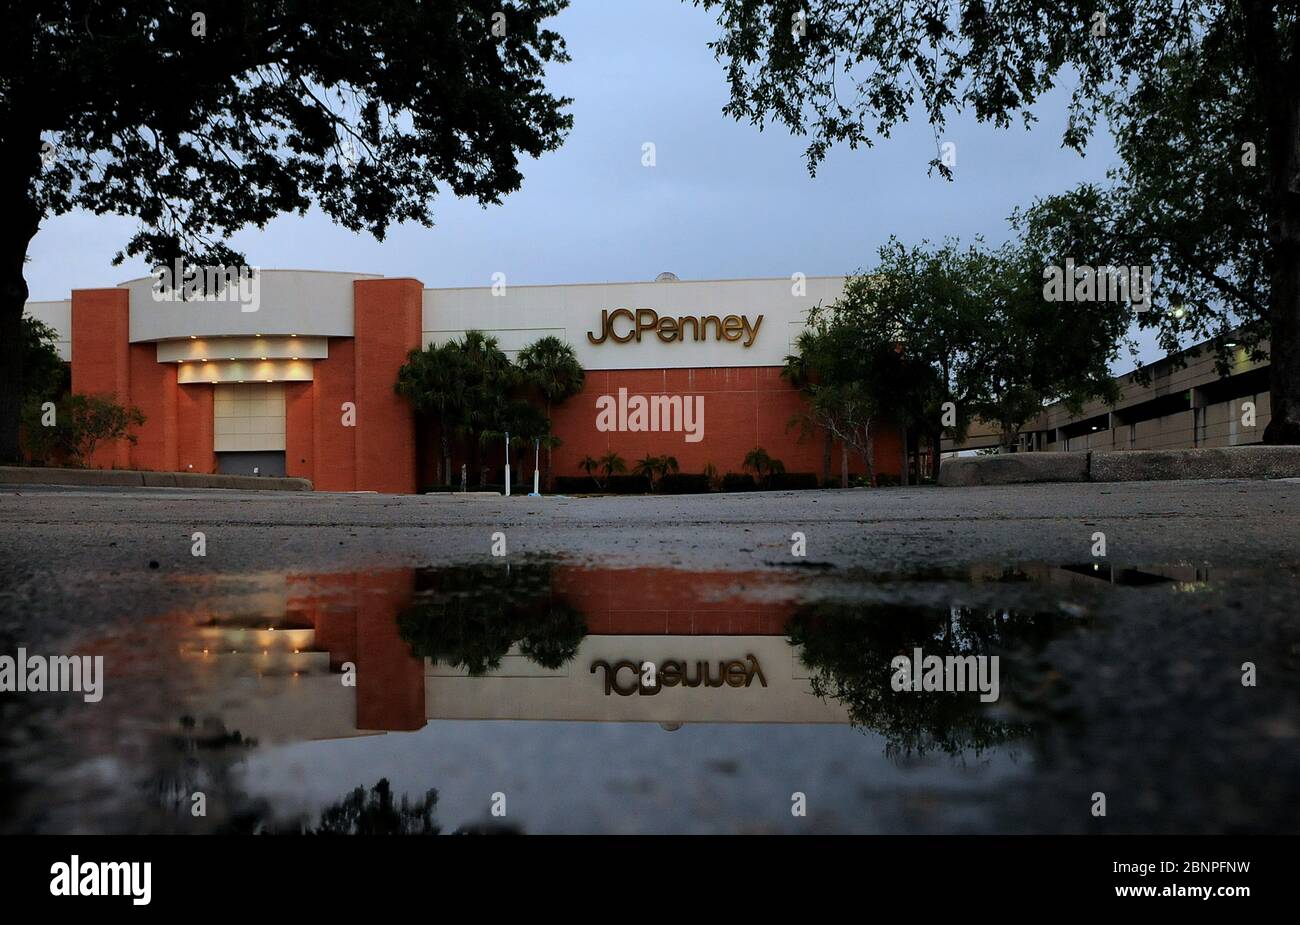 Orlando, United States. 16th May, 2020. A JC Penney store that was temporarily closed due to the COVID-19 pandemic is seen on the day the company filed for bankruptcy protection and announced it would be closing some of its 800 stores amid the coronavirus crisis and ongoing debt problems. Credit: SOPA Images Limited/Alamy Live News Stock Photo